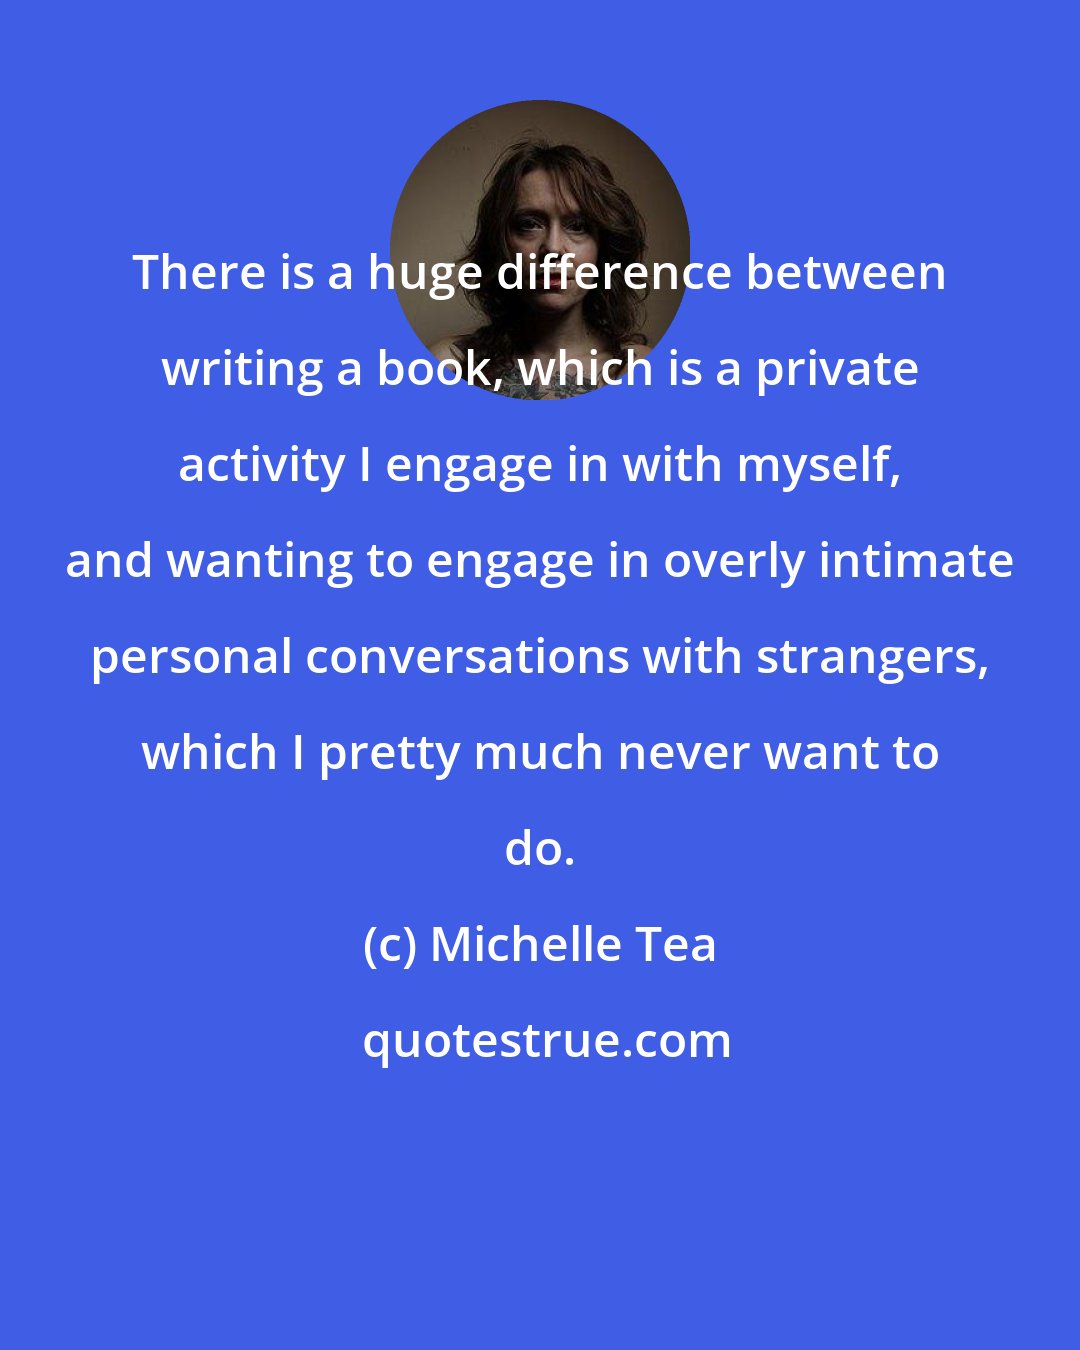 Michelle Tea: There is a huge difference between writing a book, which is a private activity I engage in with myself, and wanting to engage in overly intimate personal conversations with strangers, which I pretty much never want to do.